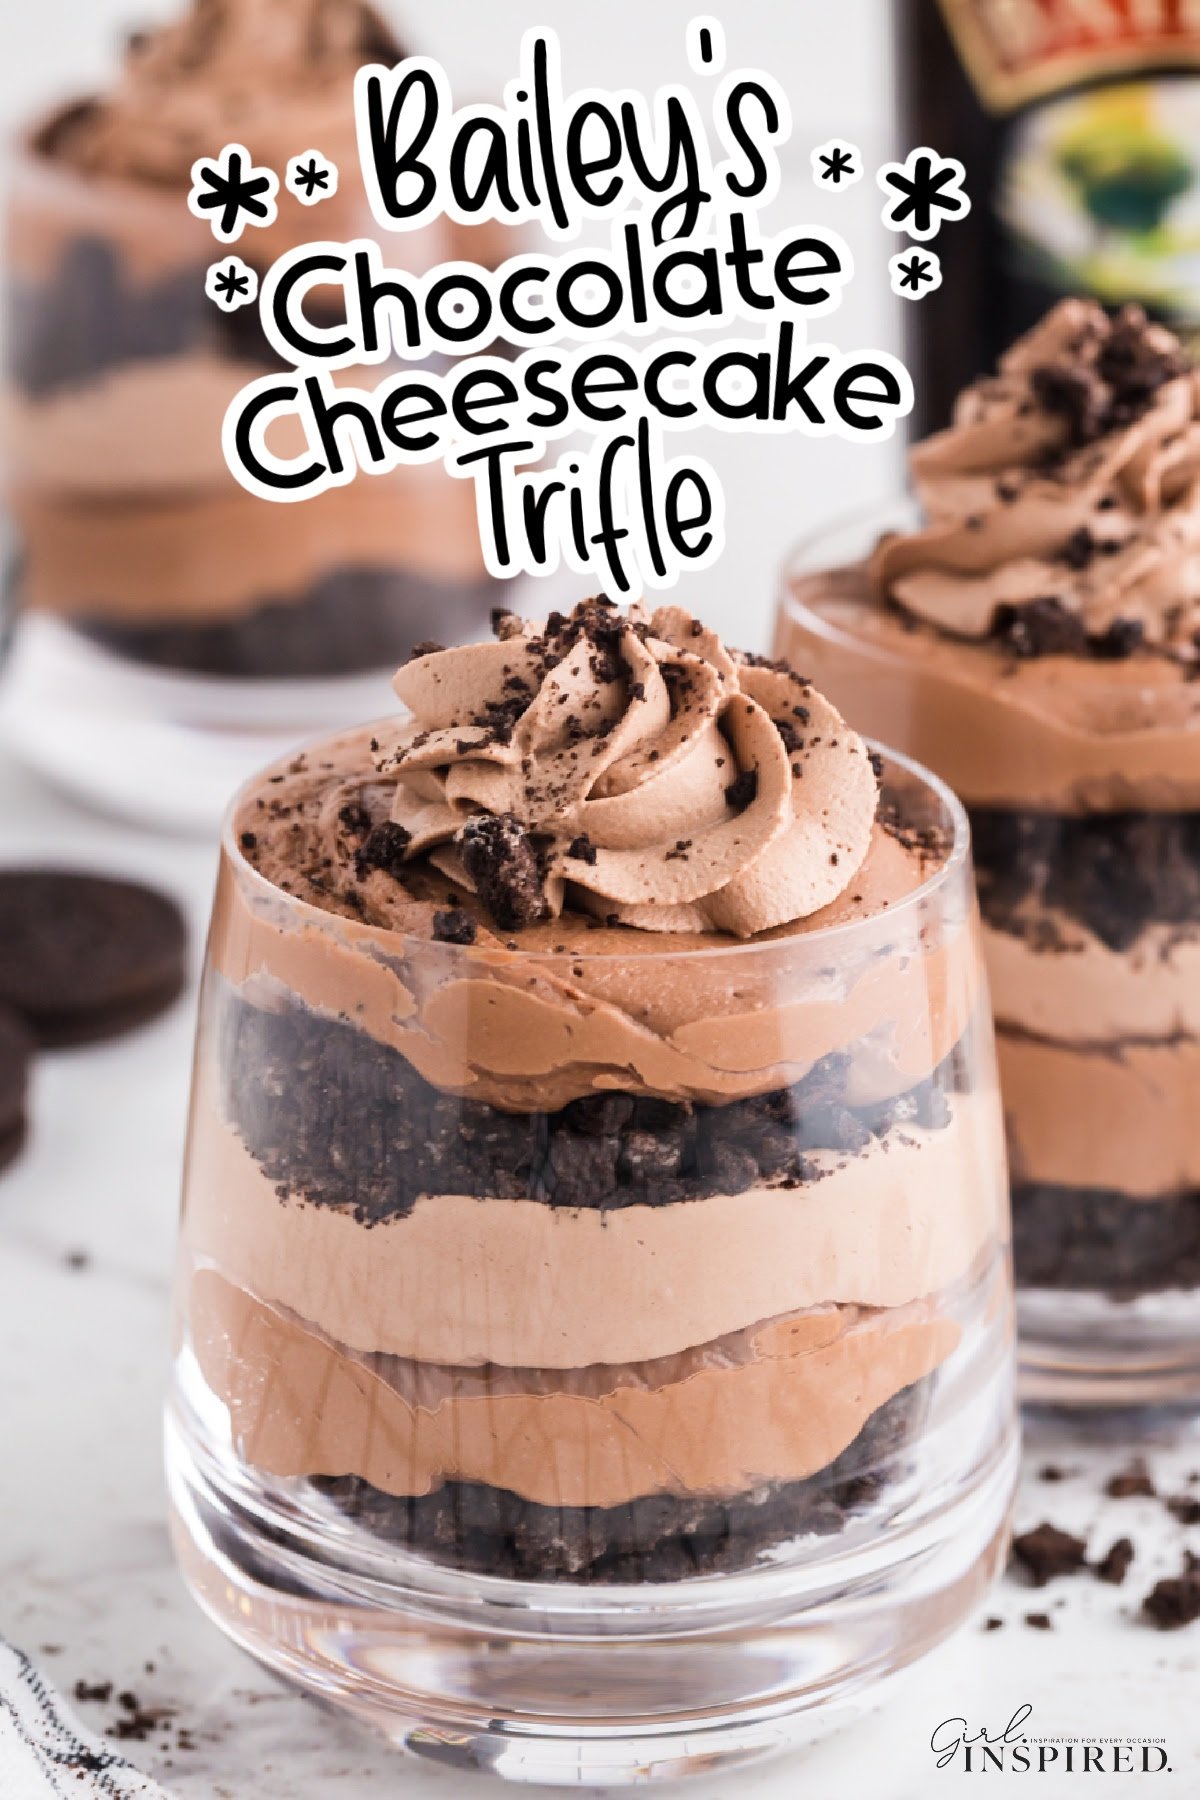 Layered chocolate cheesecake and cookie crumbs in a stemless wine glass and text title "Bailey's Chocolate Cheesecake Trifle."